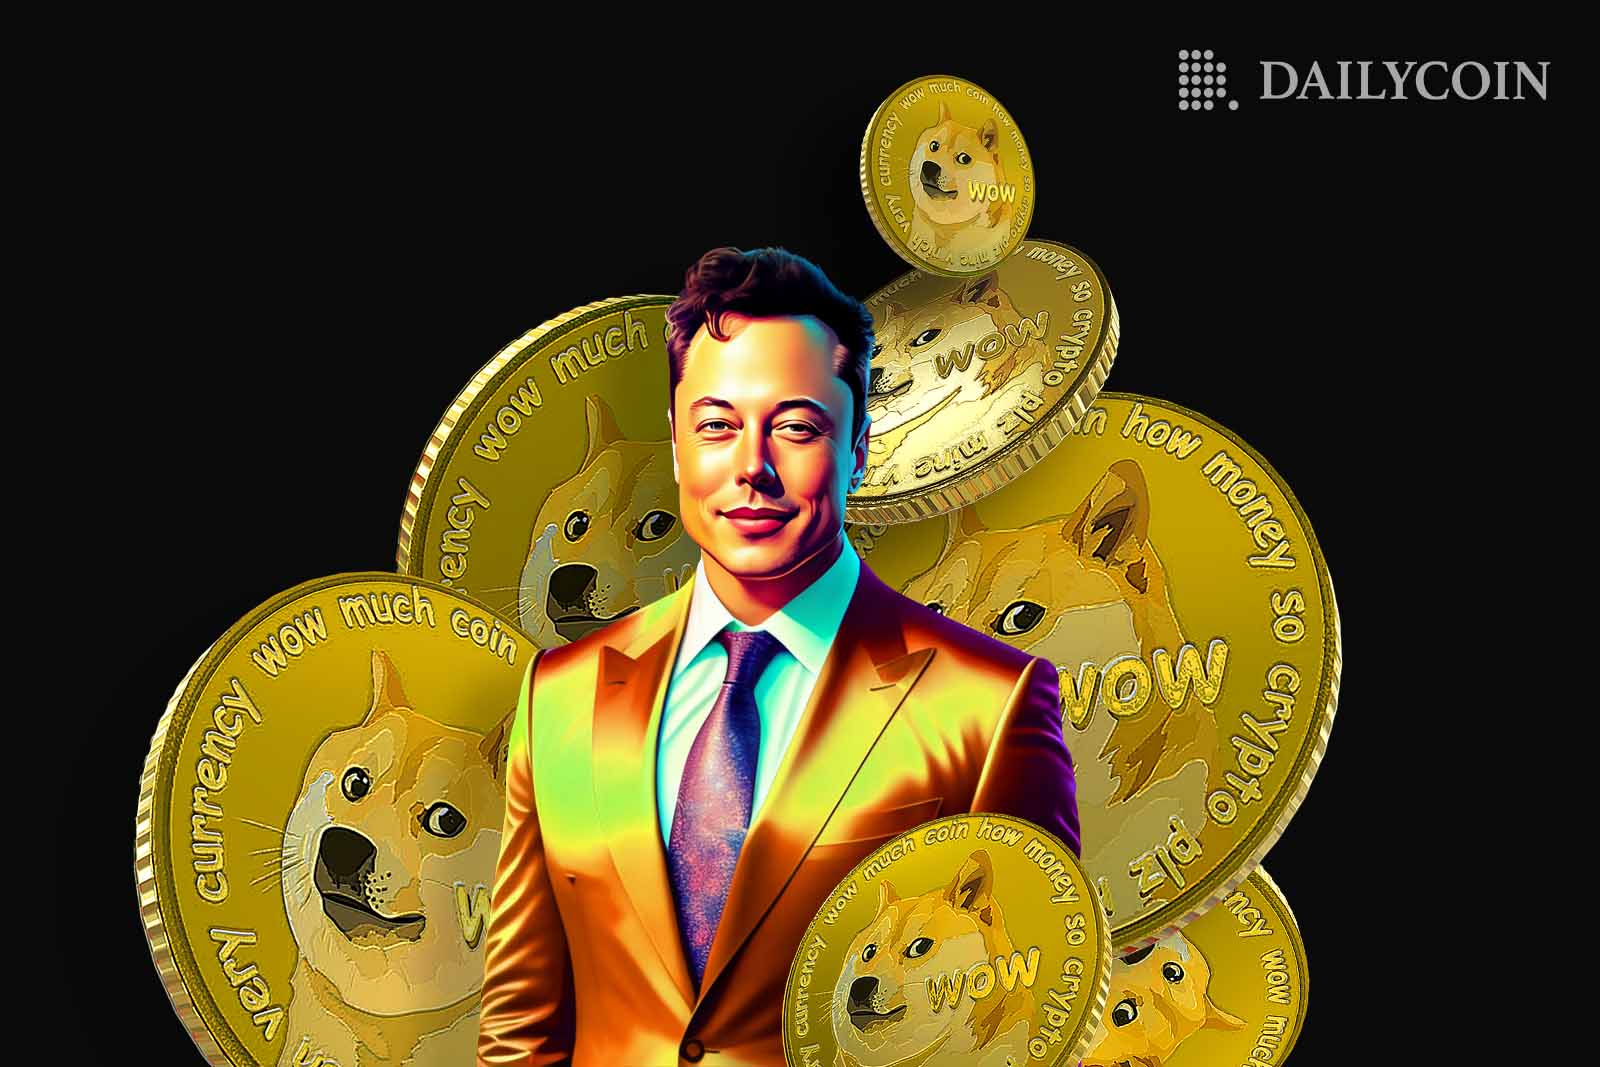 Elon Musk wearing golden suite surounded by dogecoins.